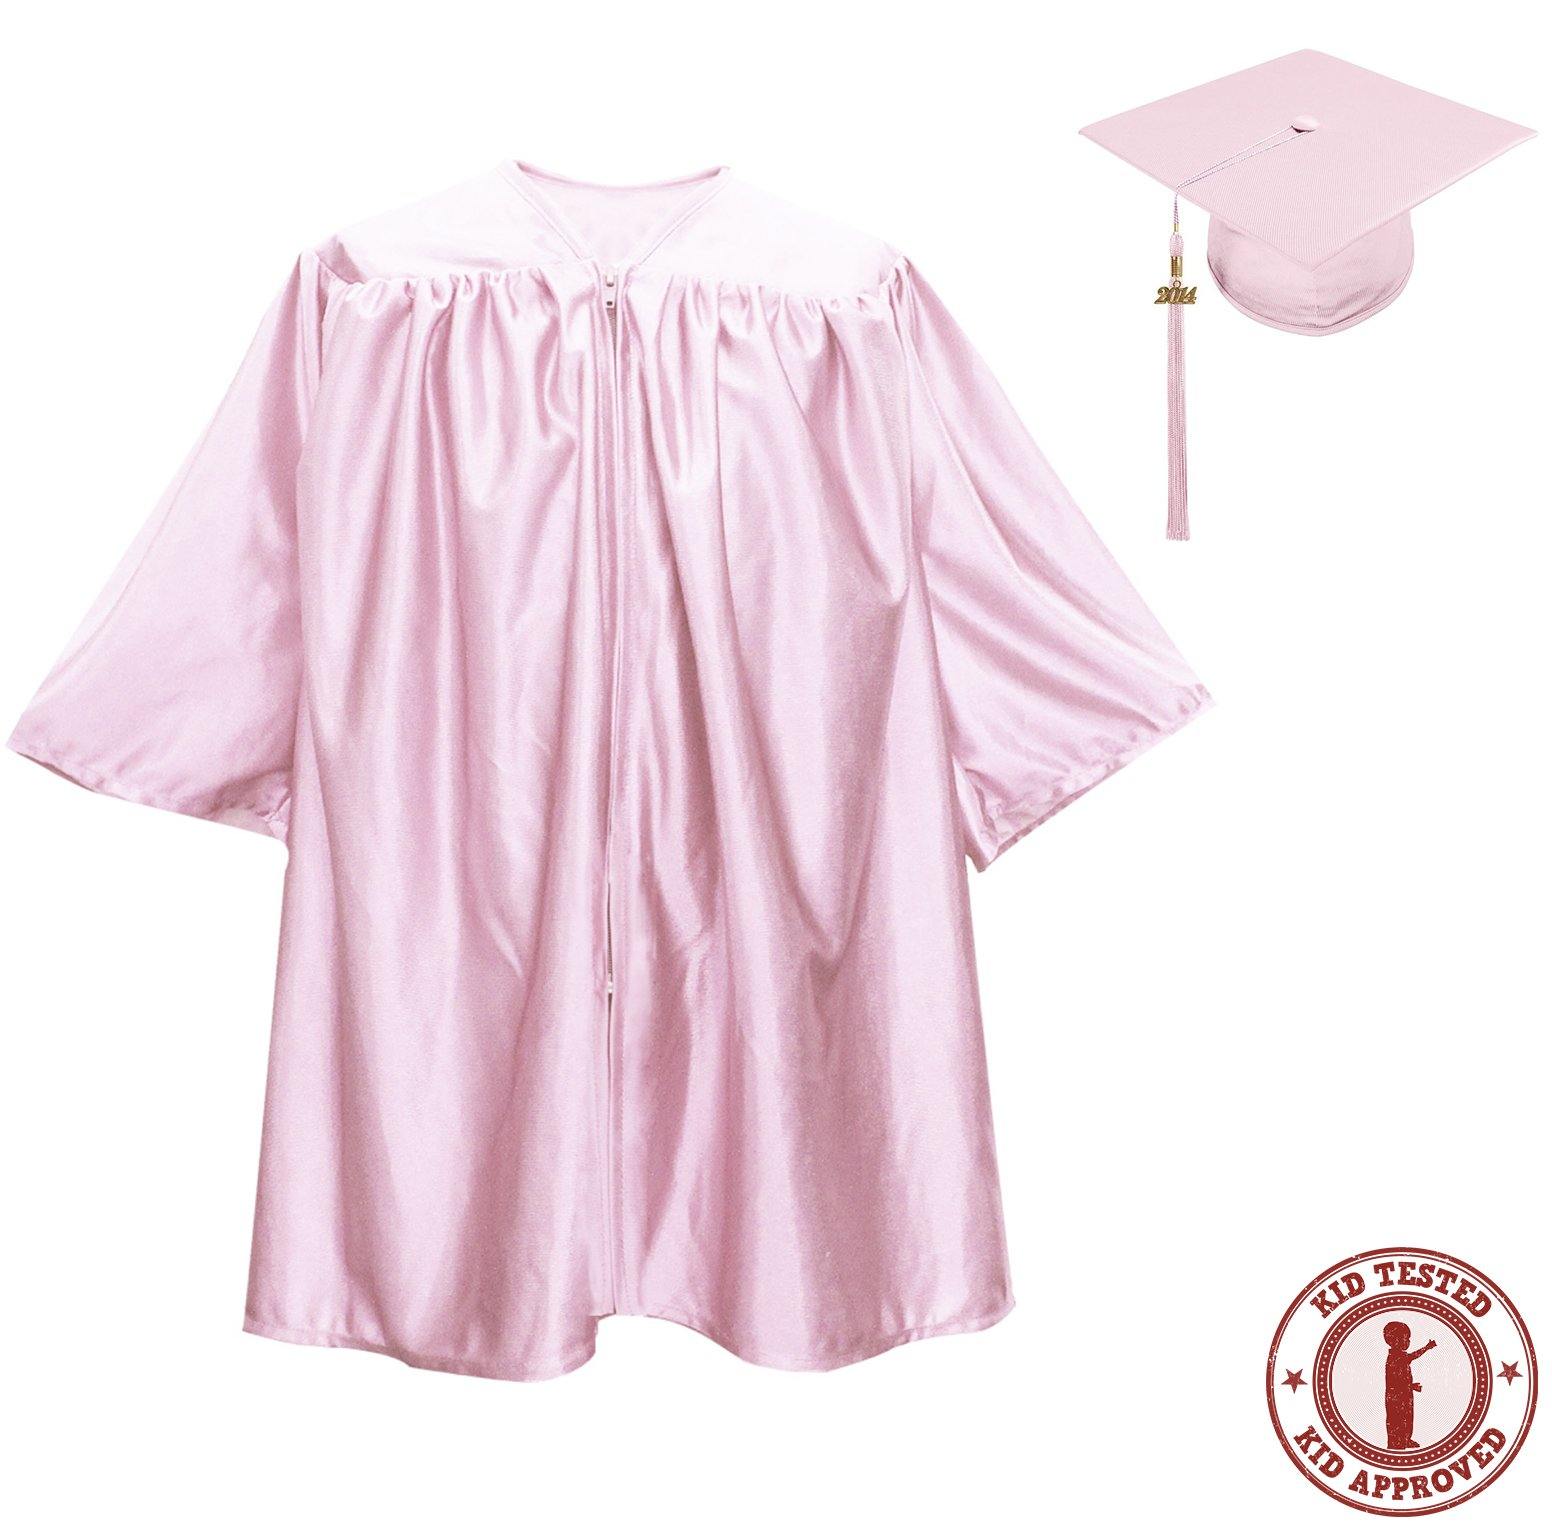 Pink Cap and Gown 5'5 Silky material #graduation... - Depop